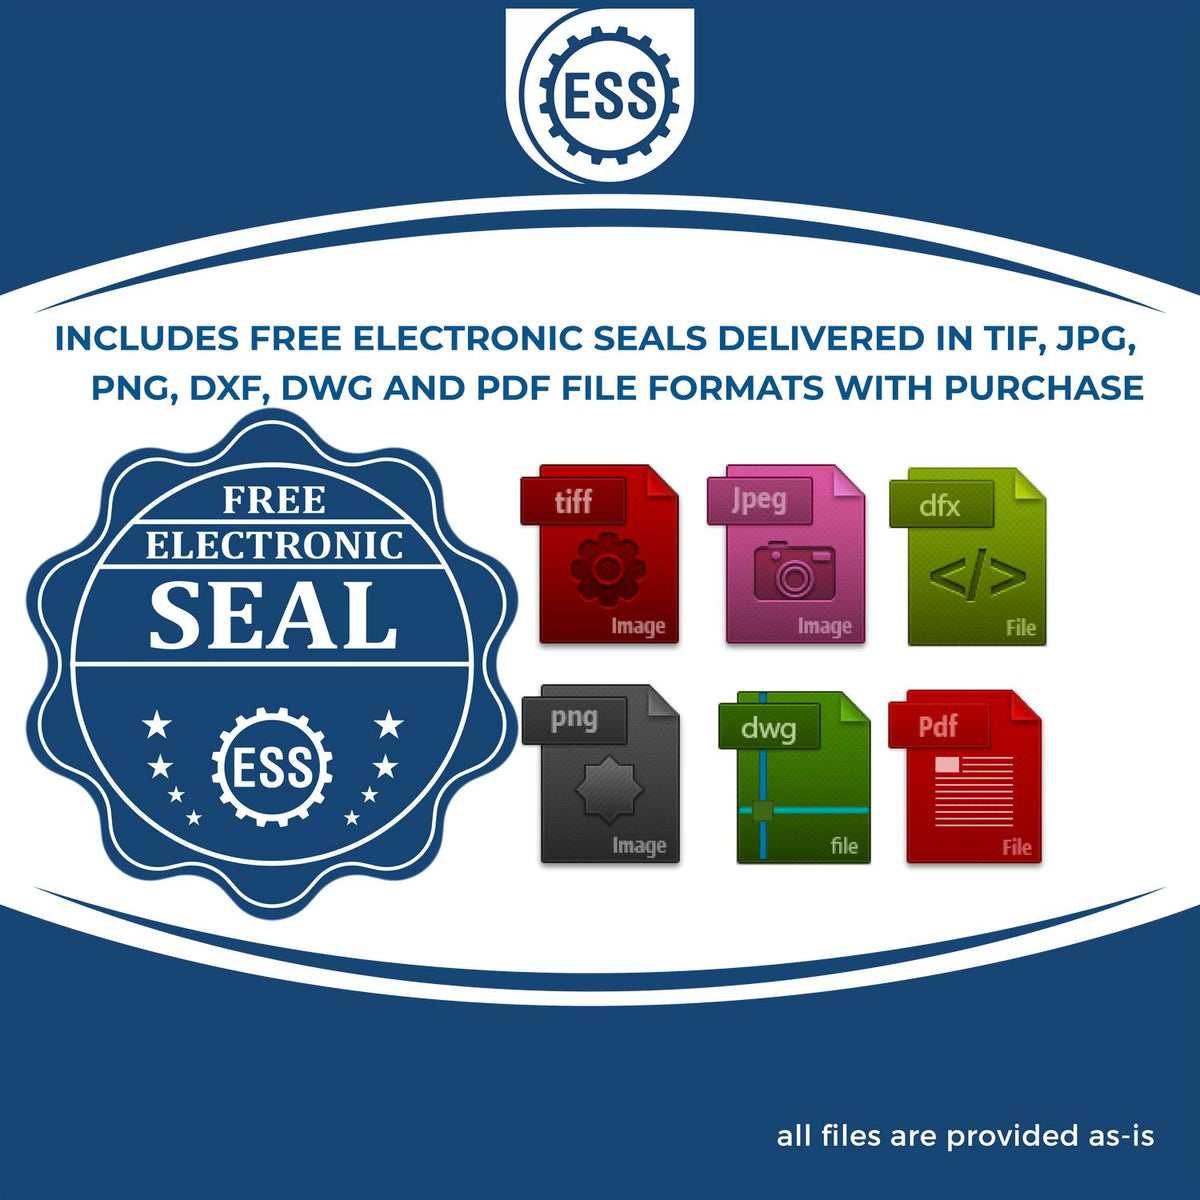 An infographic for the free electronic seal for the Long Reach Arkansas Land Surveyor Seal illustrating the different file type icons such as DXF, DWG, TIF, JPG and PNG.